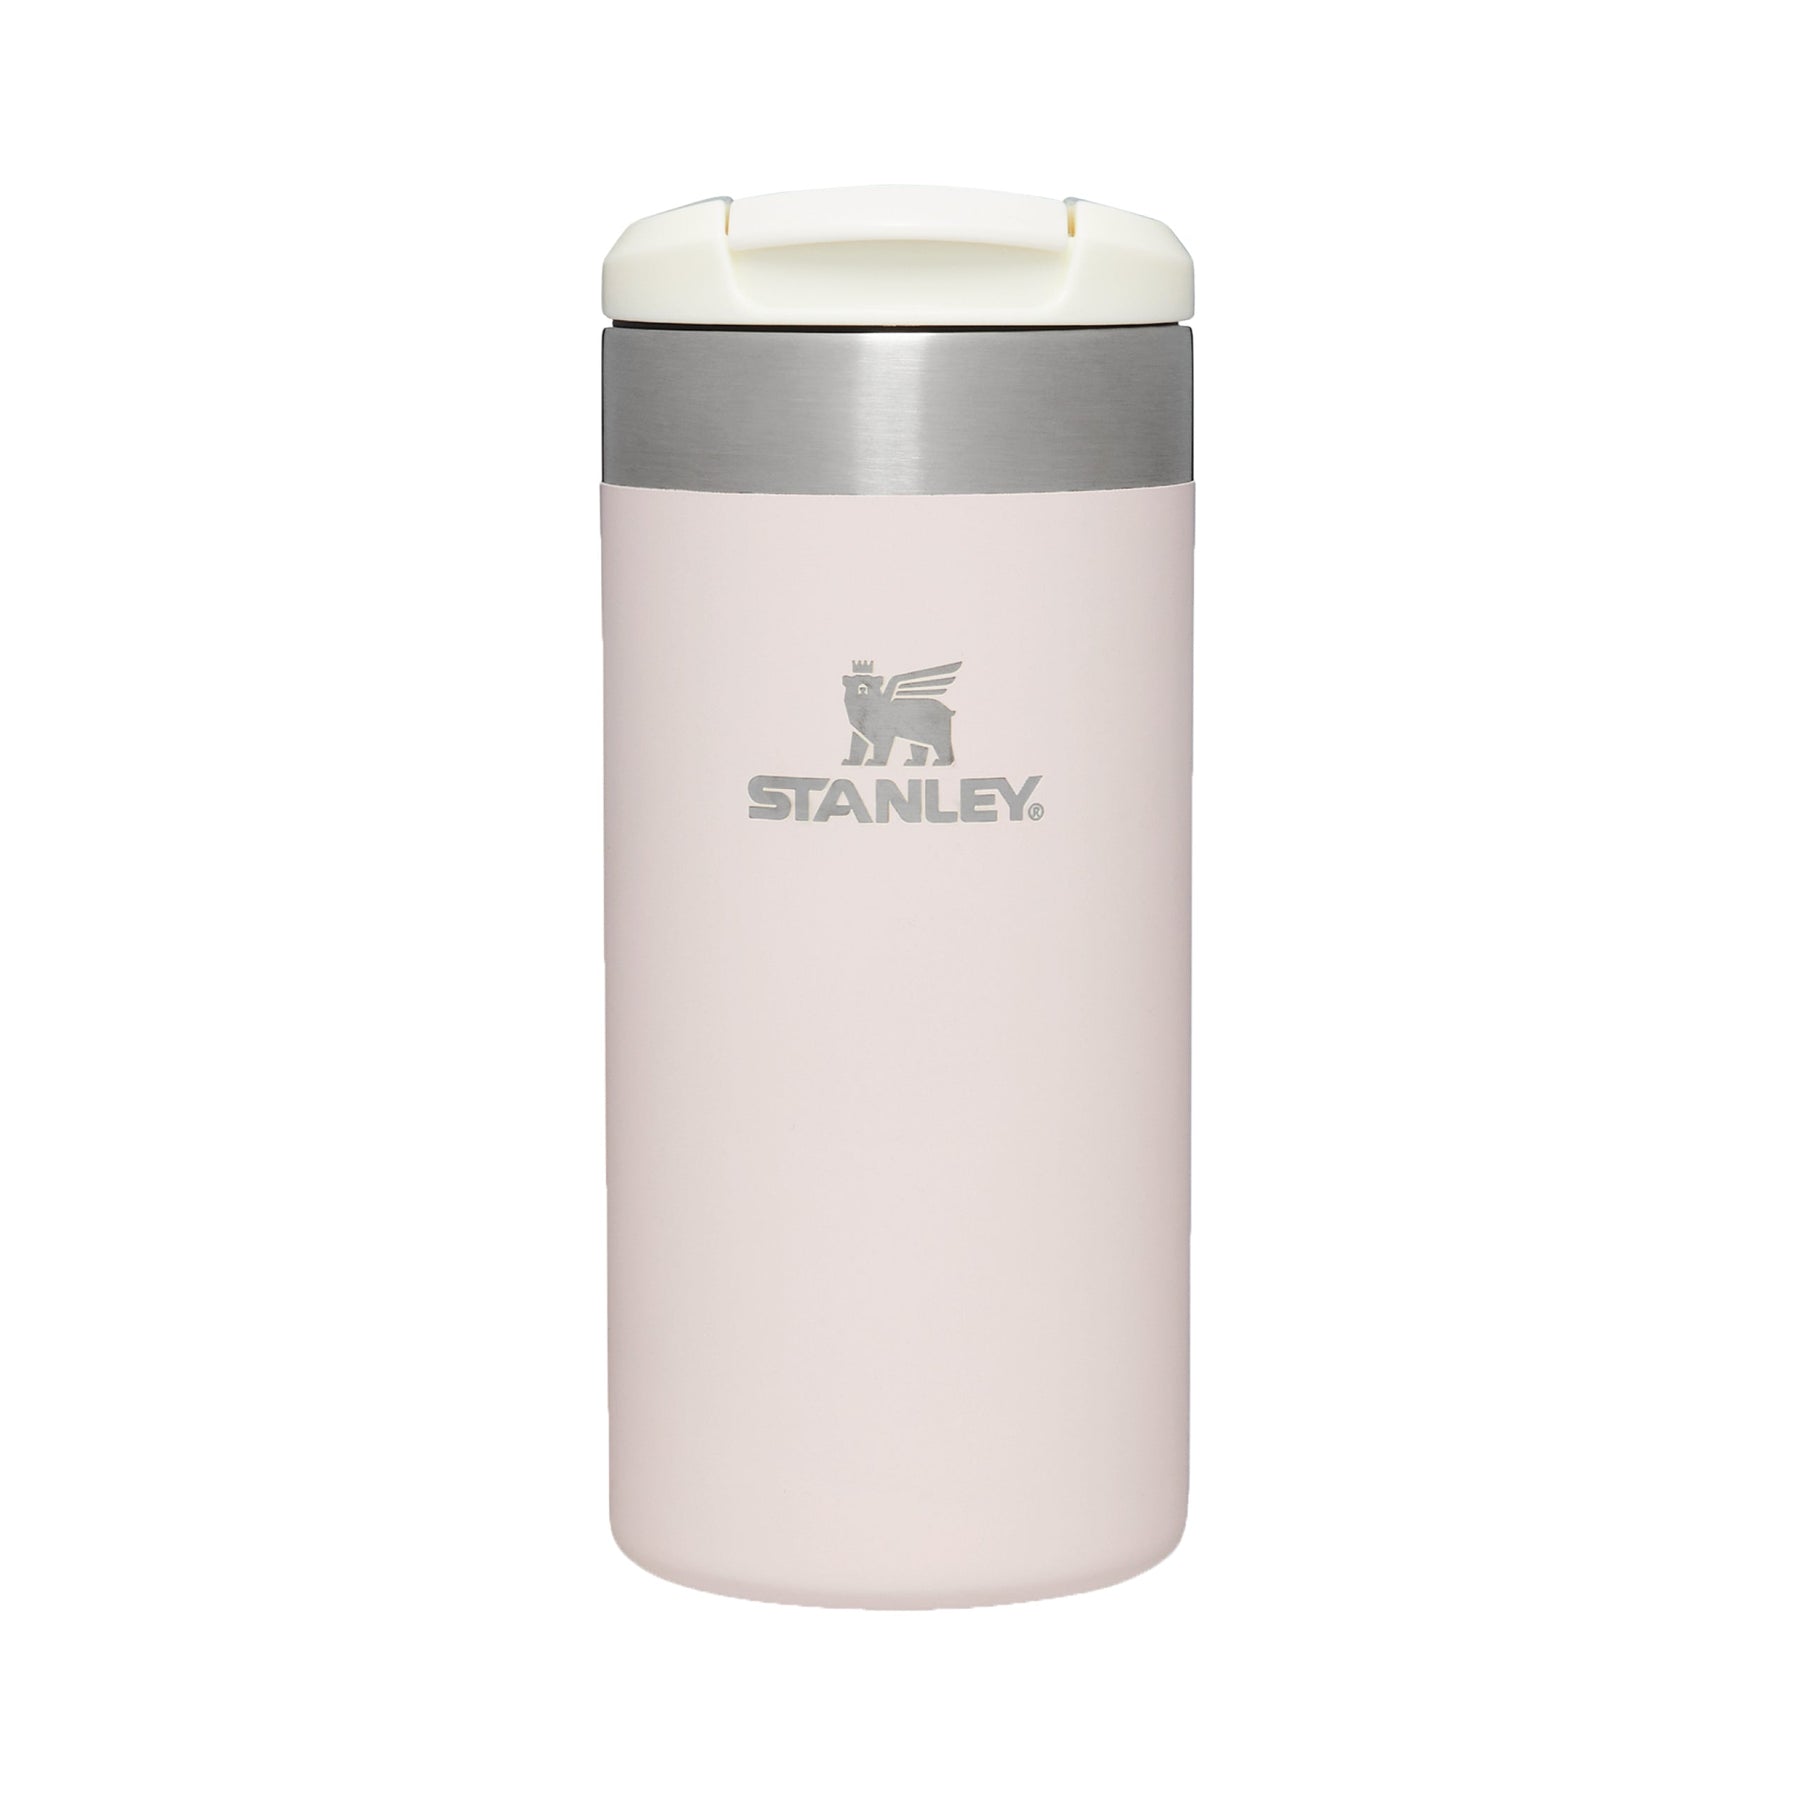 STANLEY NeverLeak Leakproof Travel Mug 0.47L - Keeps Hot for 7 Hours -  Thermos Flask for Coffee, Tea…See more STANLEY NeverLeak Leakproof Travel  Mug